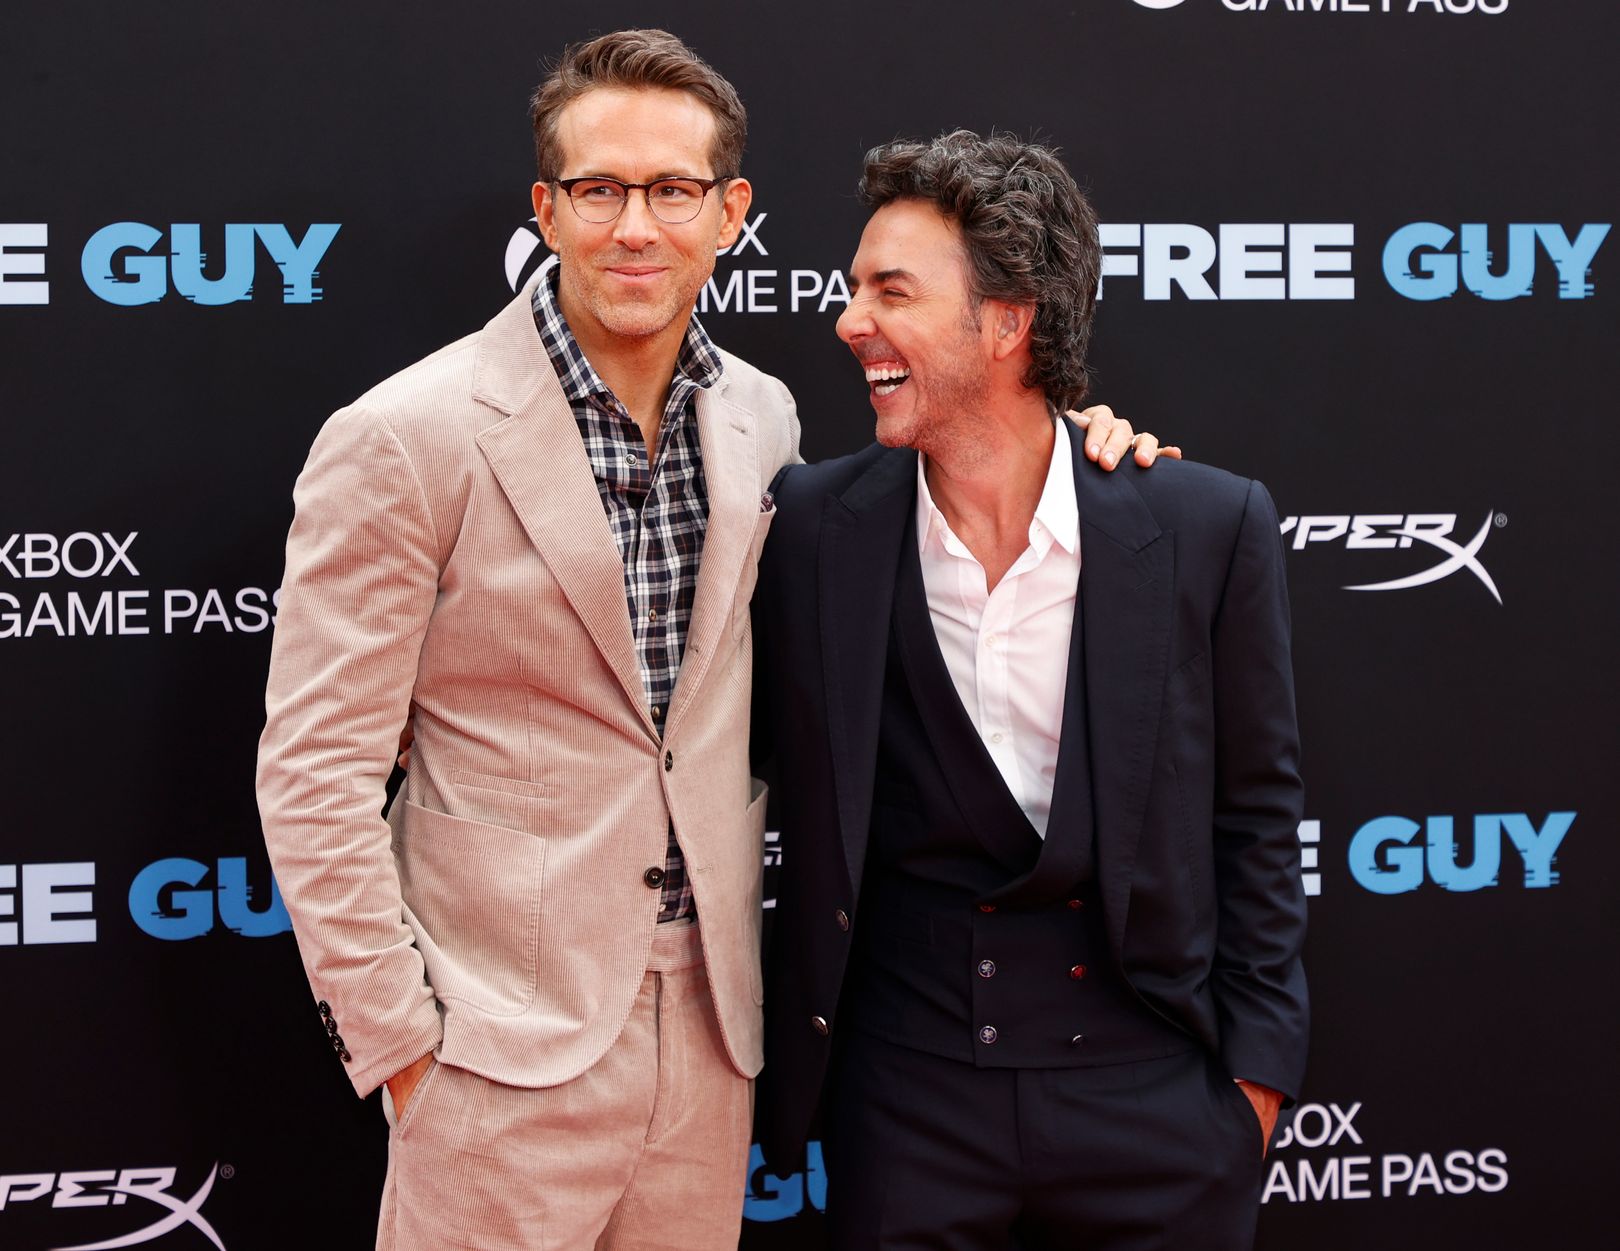 Ryan Reynolds and Shawn Levy 'Free Guy' at movie premiere embracing each other